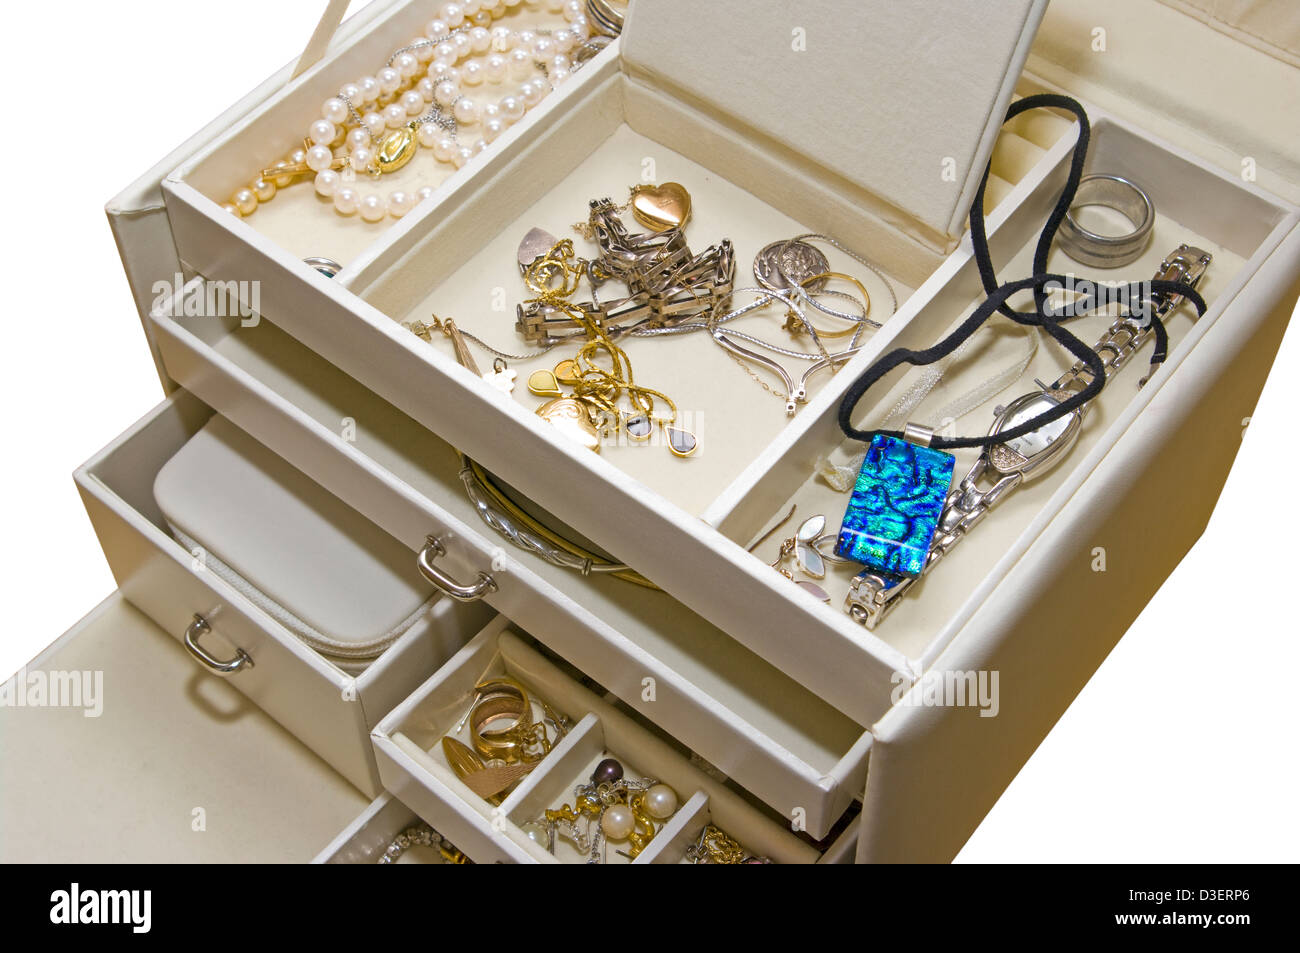 Jewellery Box High Resolution Stock Photography and Images - Alamy